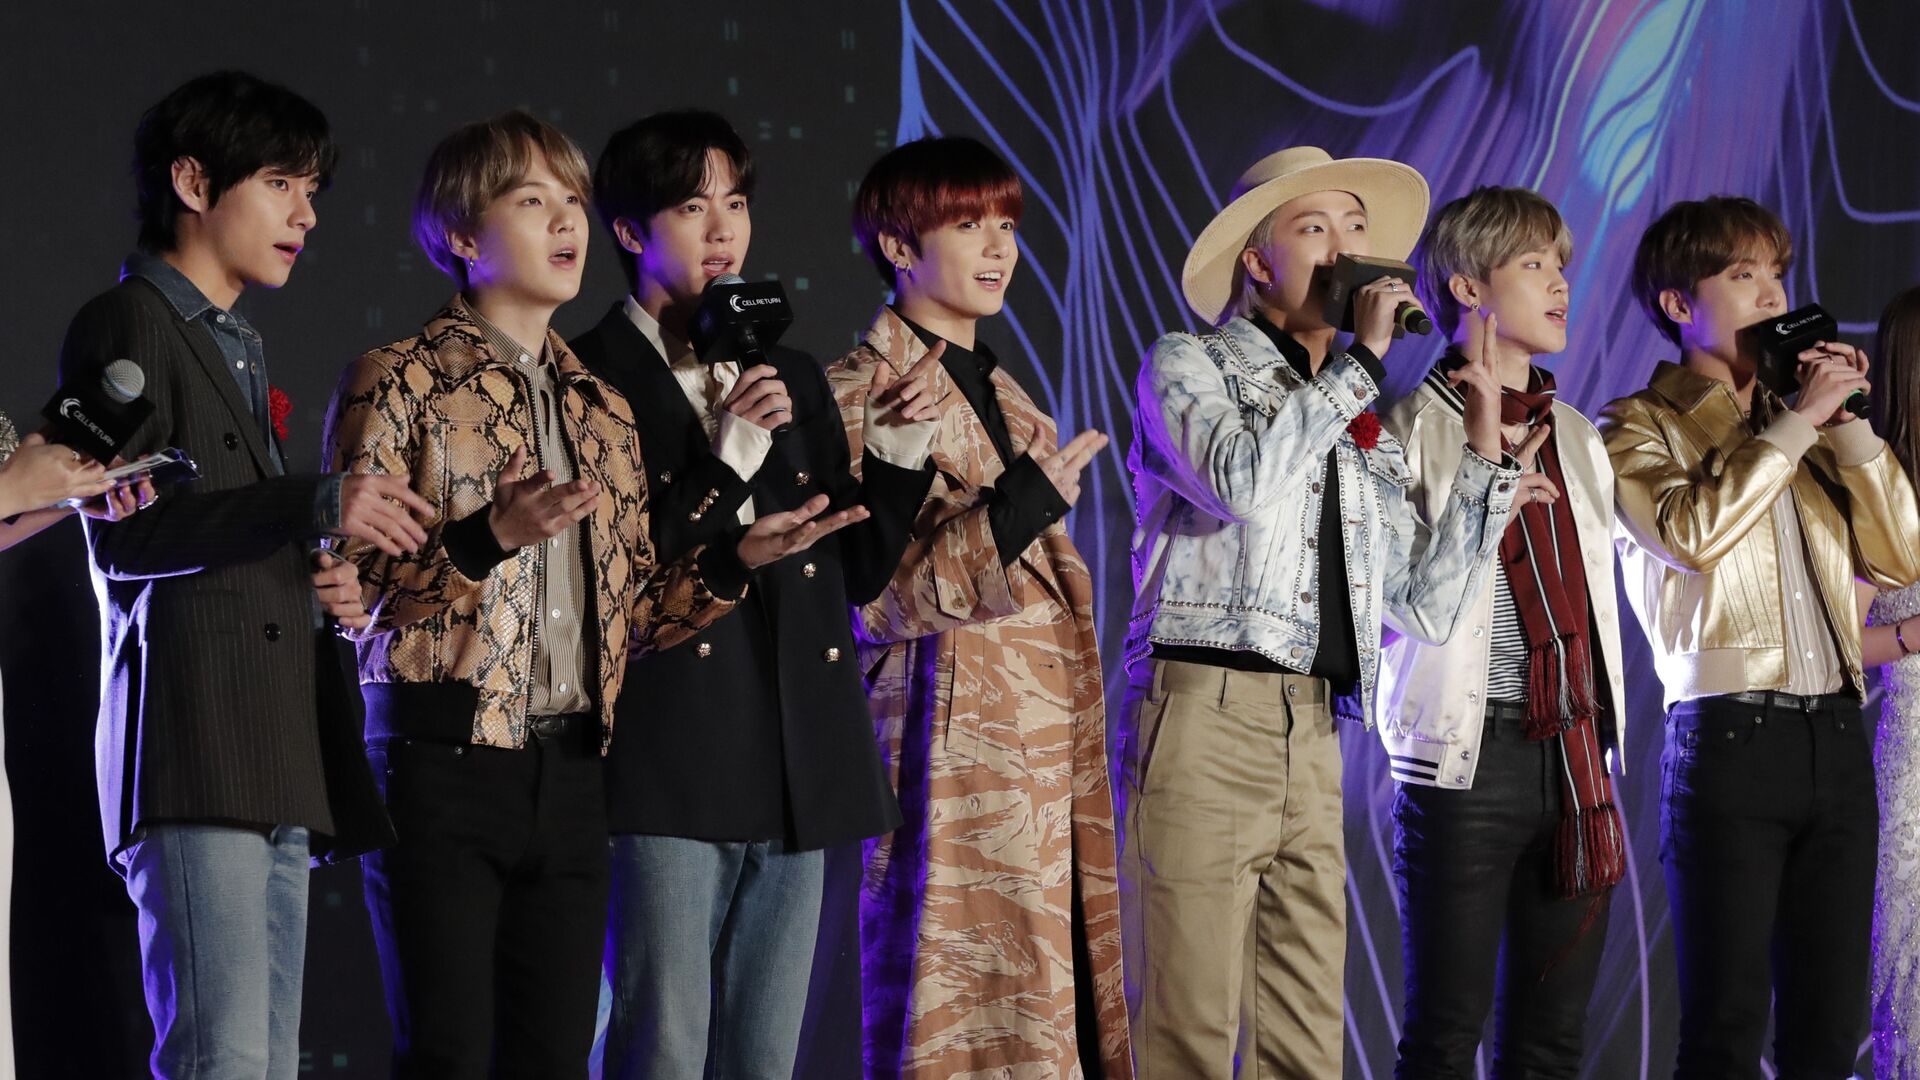 Members of the band BTS attend at a red carpet event upon arrival at the Asian Music Awards in Nagoya, Japan Wednesday, Dec. 4, 2019 - Sputnik International, 1920, 18.09.2021